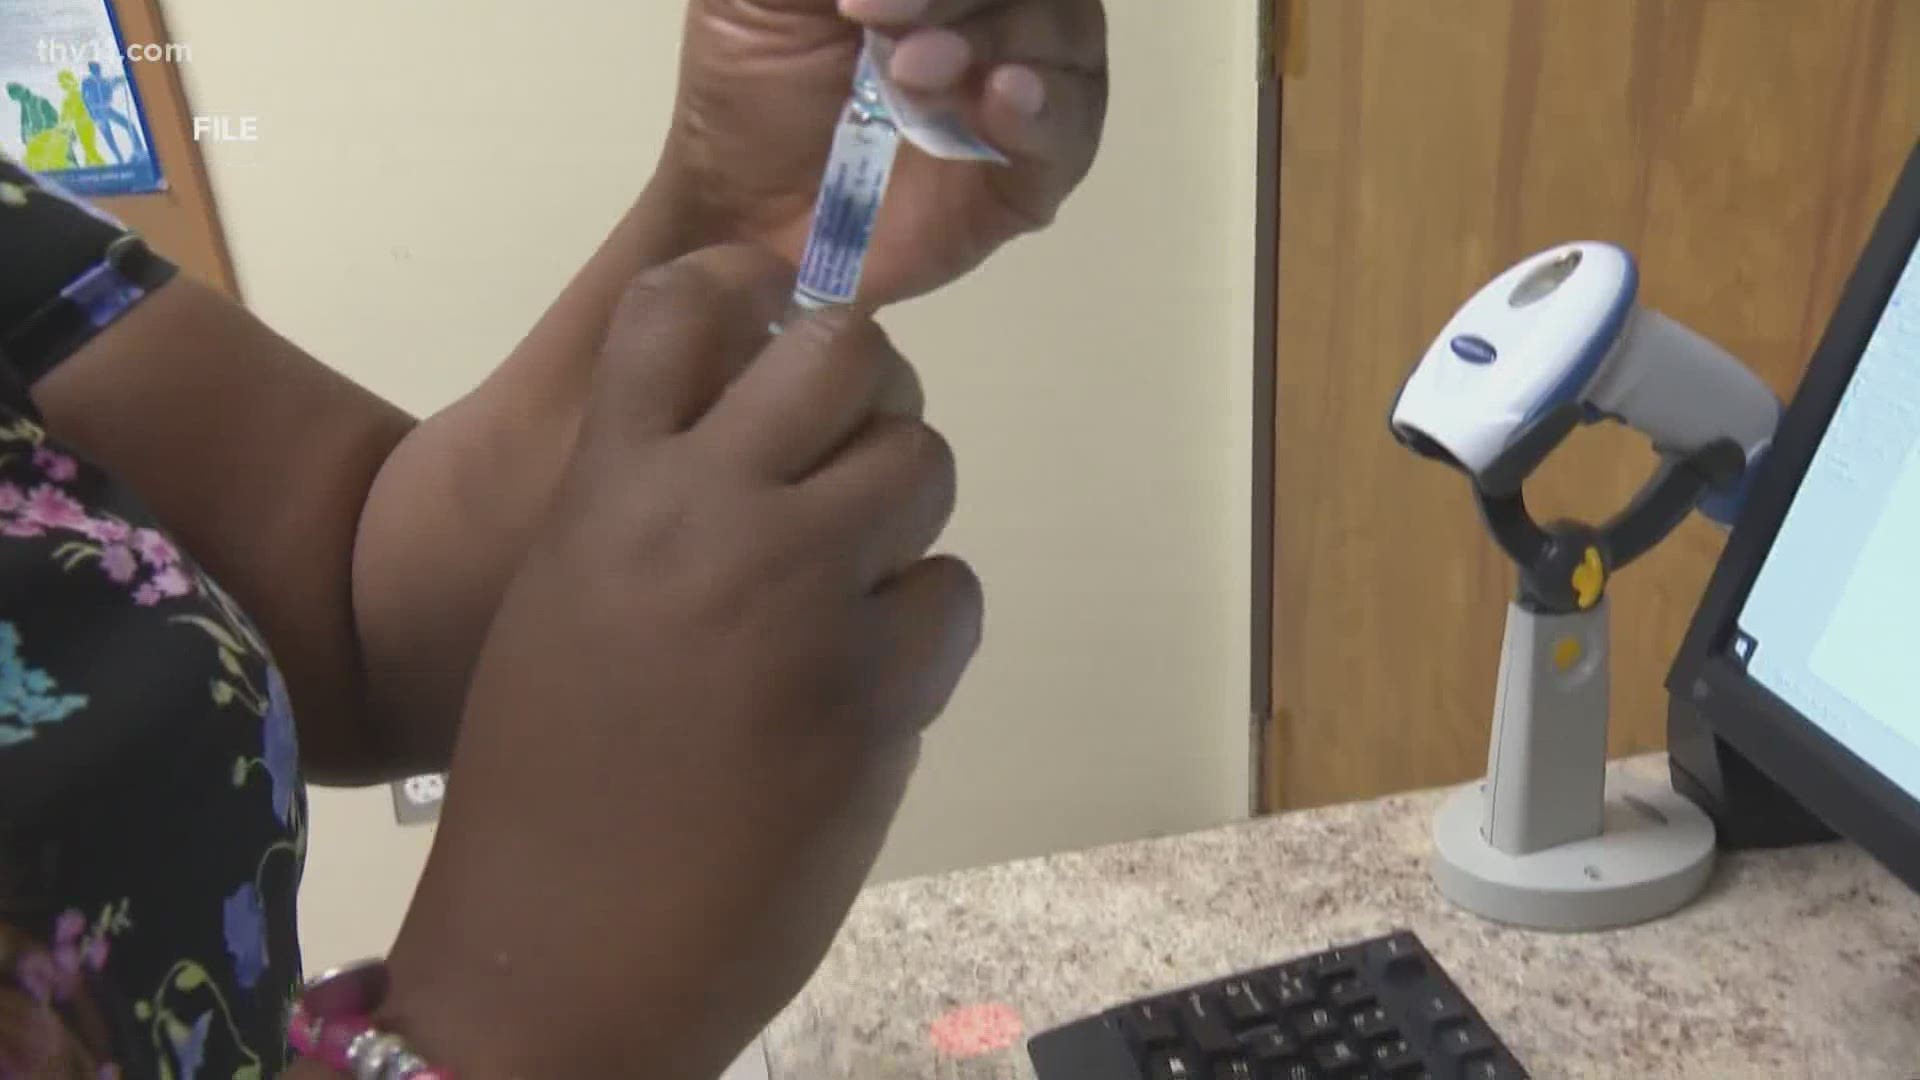 Doctors are recommending people start thinking about getting your flu shot now to help protect yourself during the pandemic once flu season comes around.